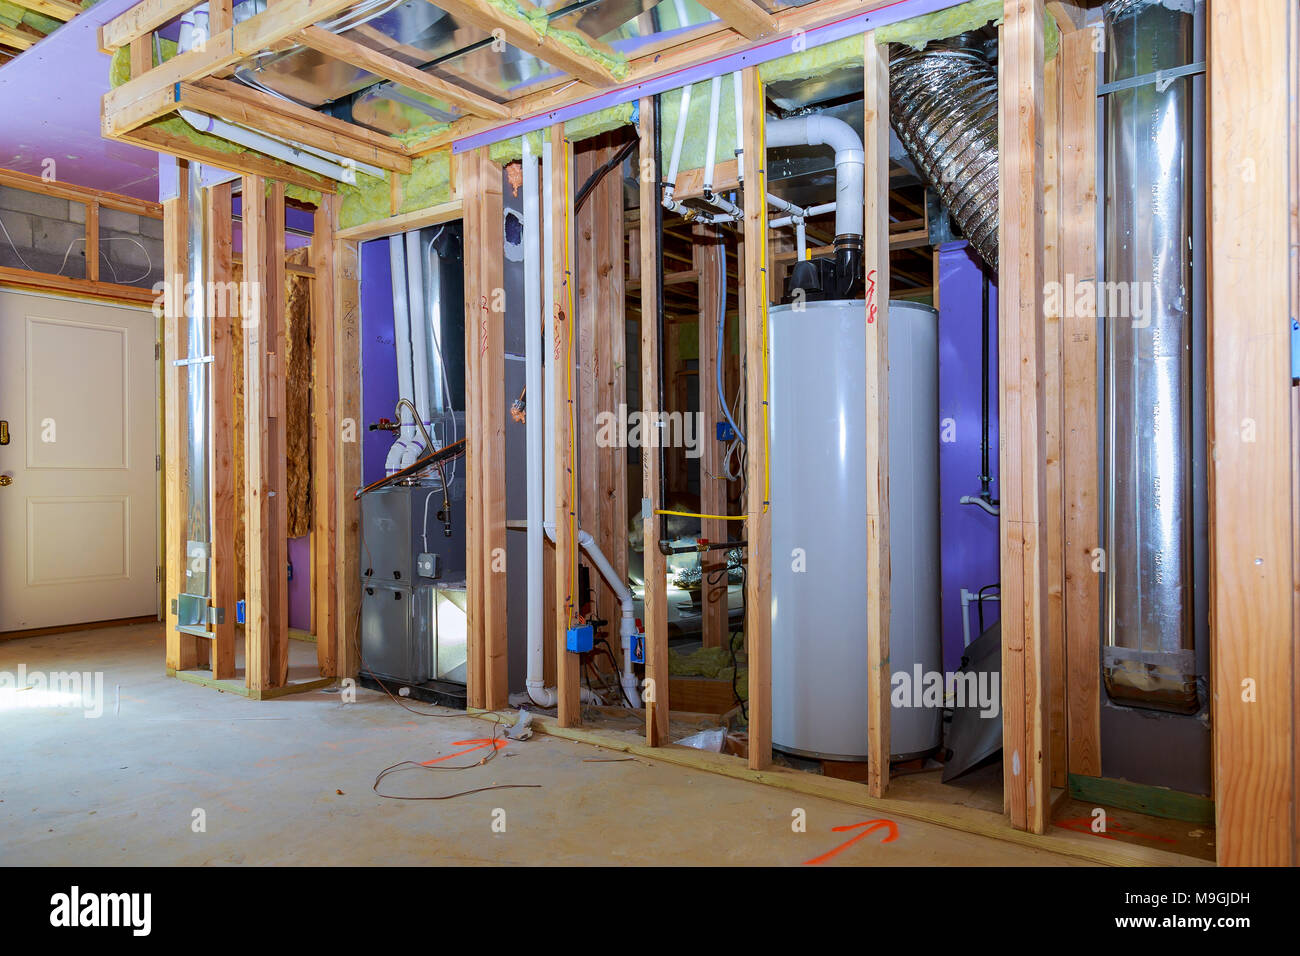 Interior Wall Framing With Piping And Wiring Installed